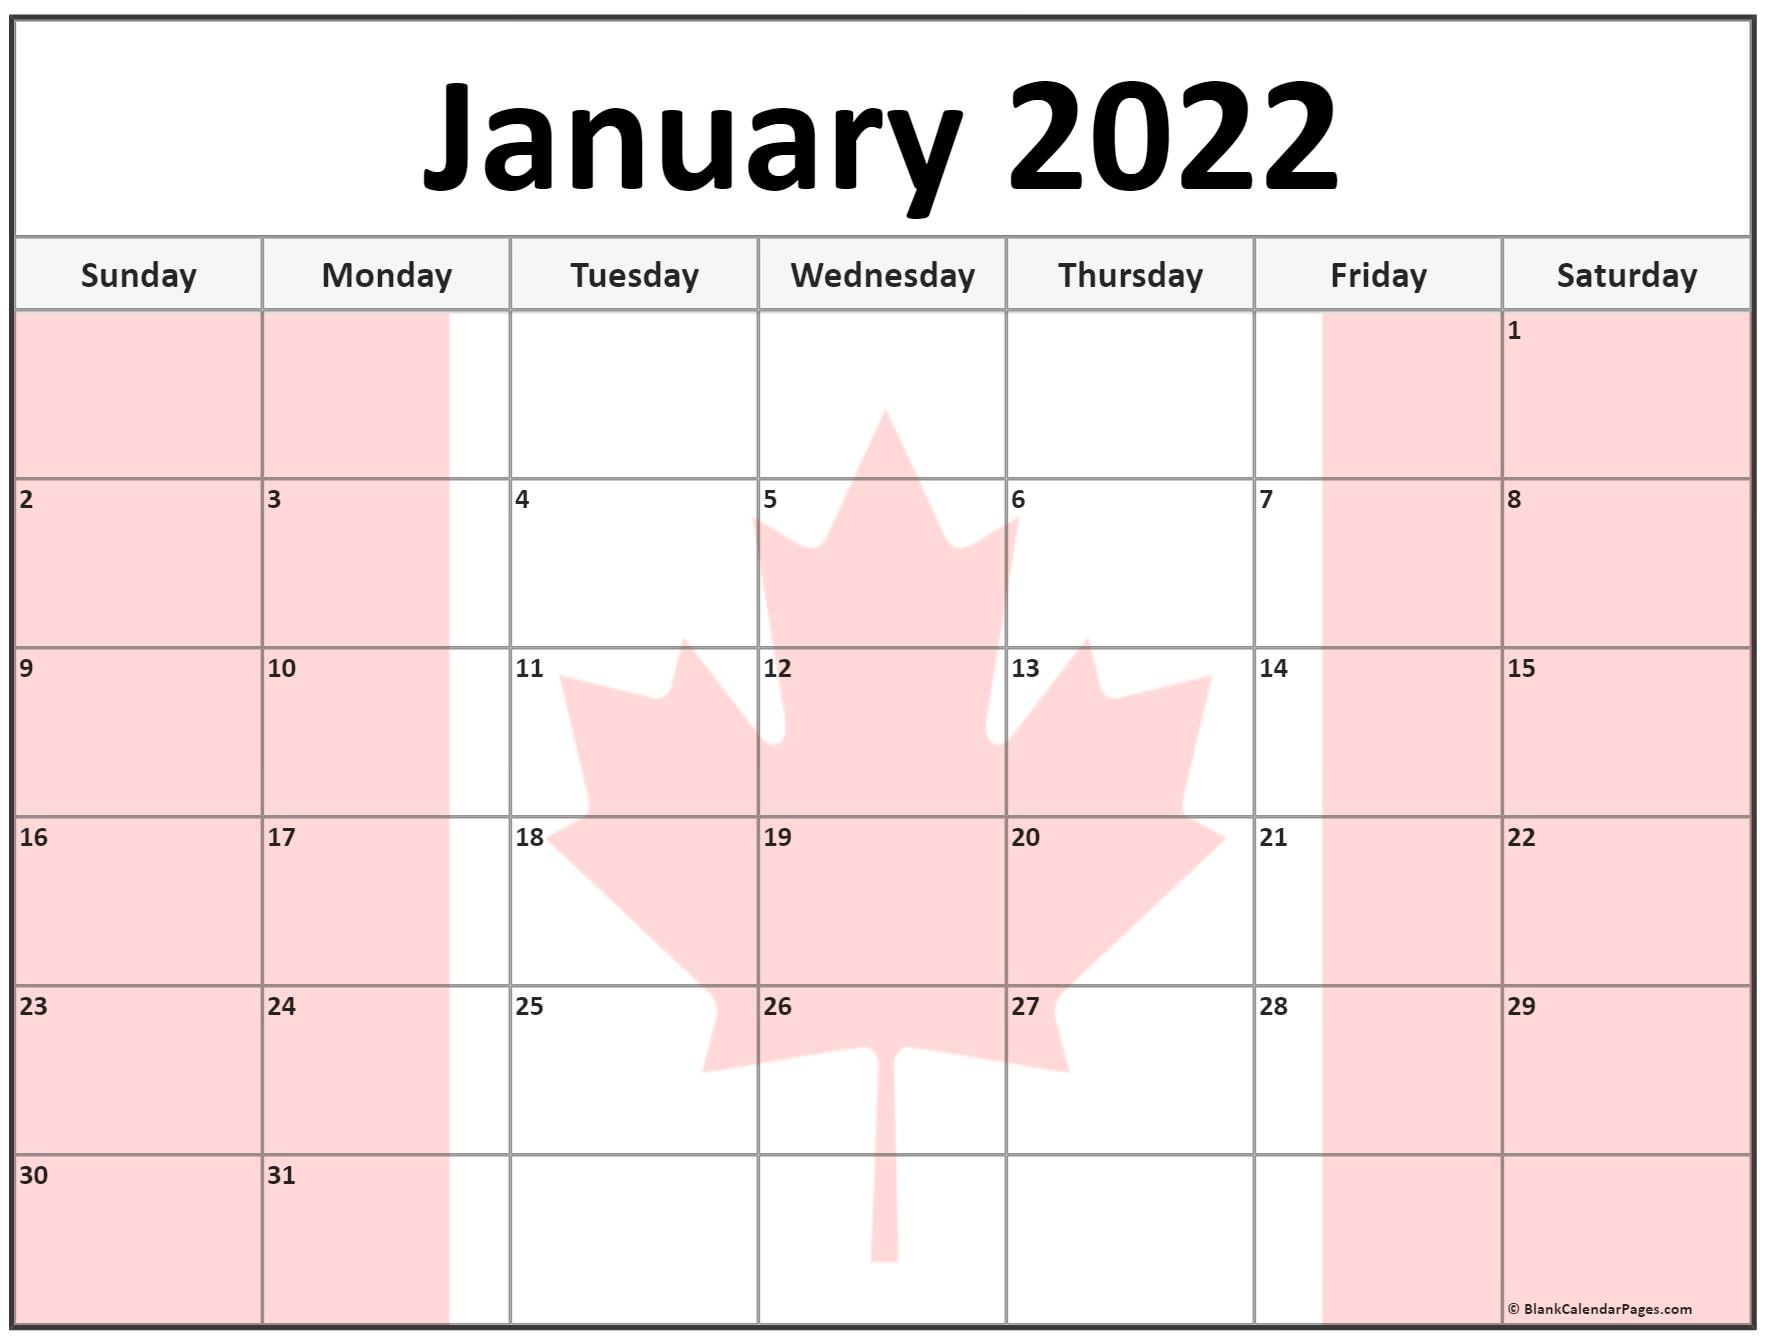 Collection Of January 2022 Photo Calendars With Image Filters.